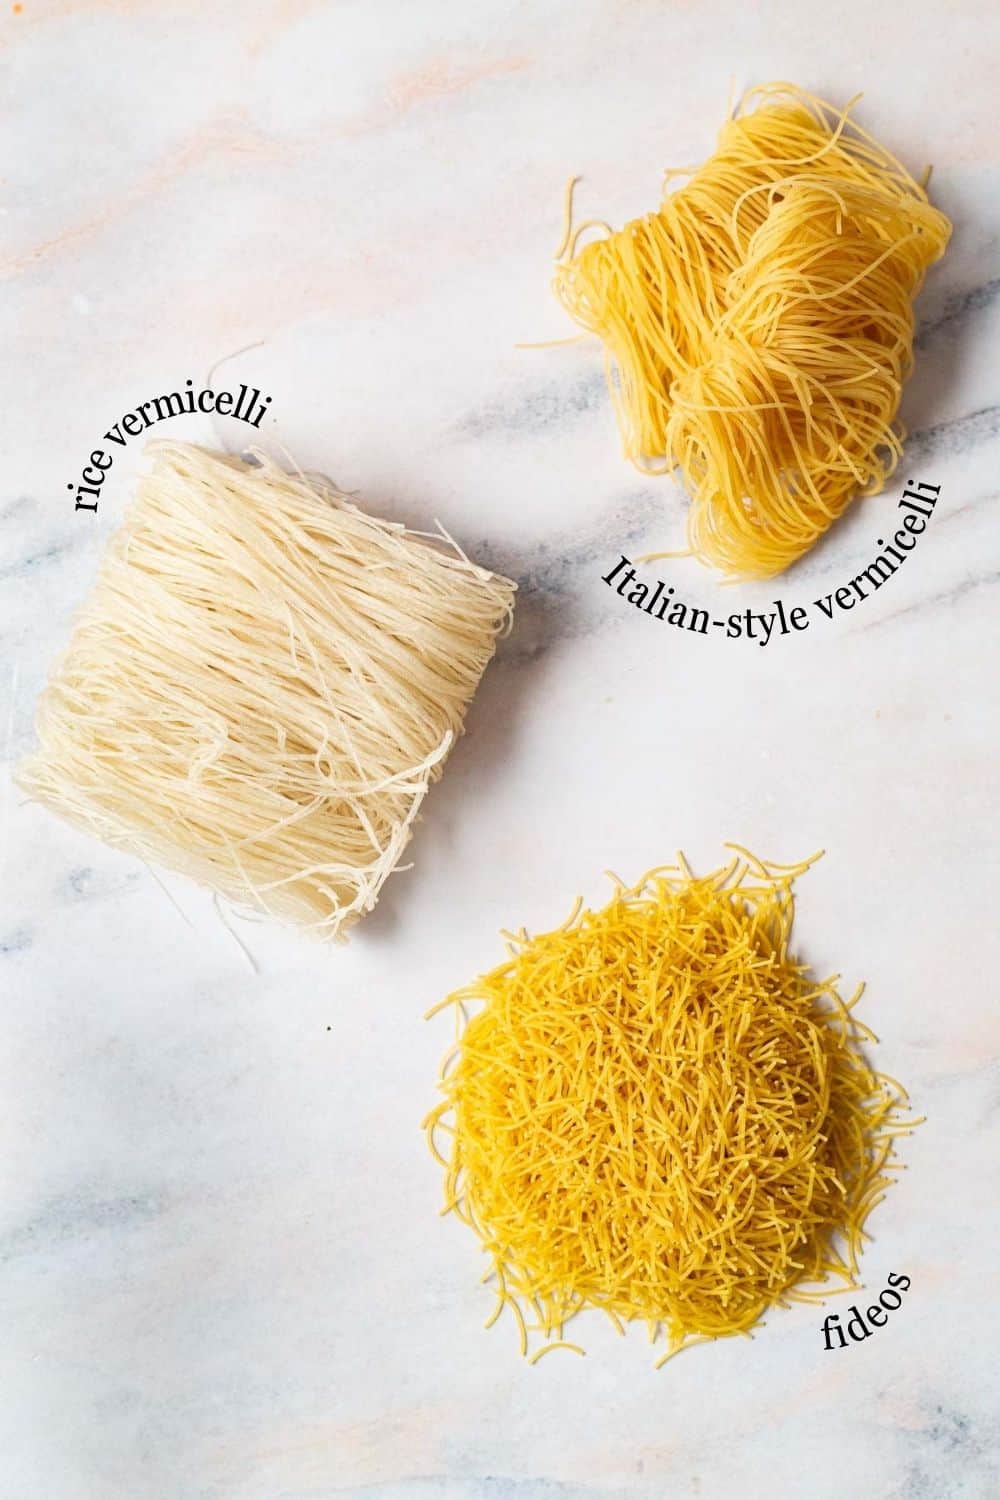 An overhead photo of rice vermicelli, Italian-style vermicelli and fideos.